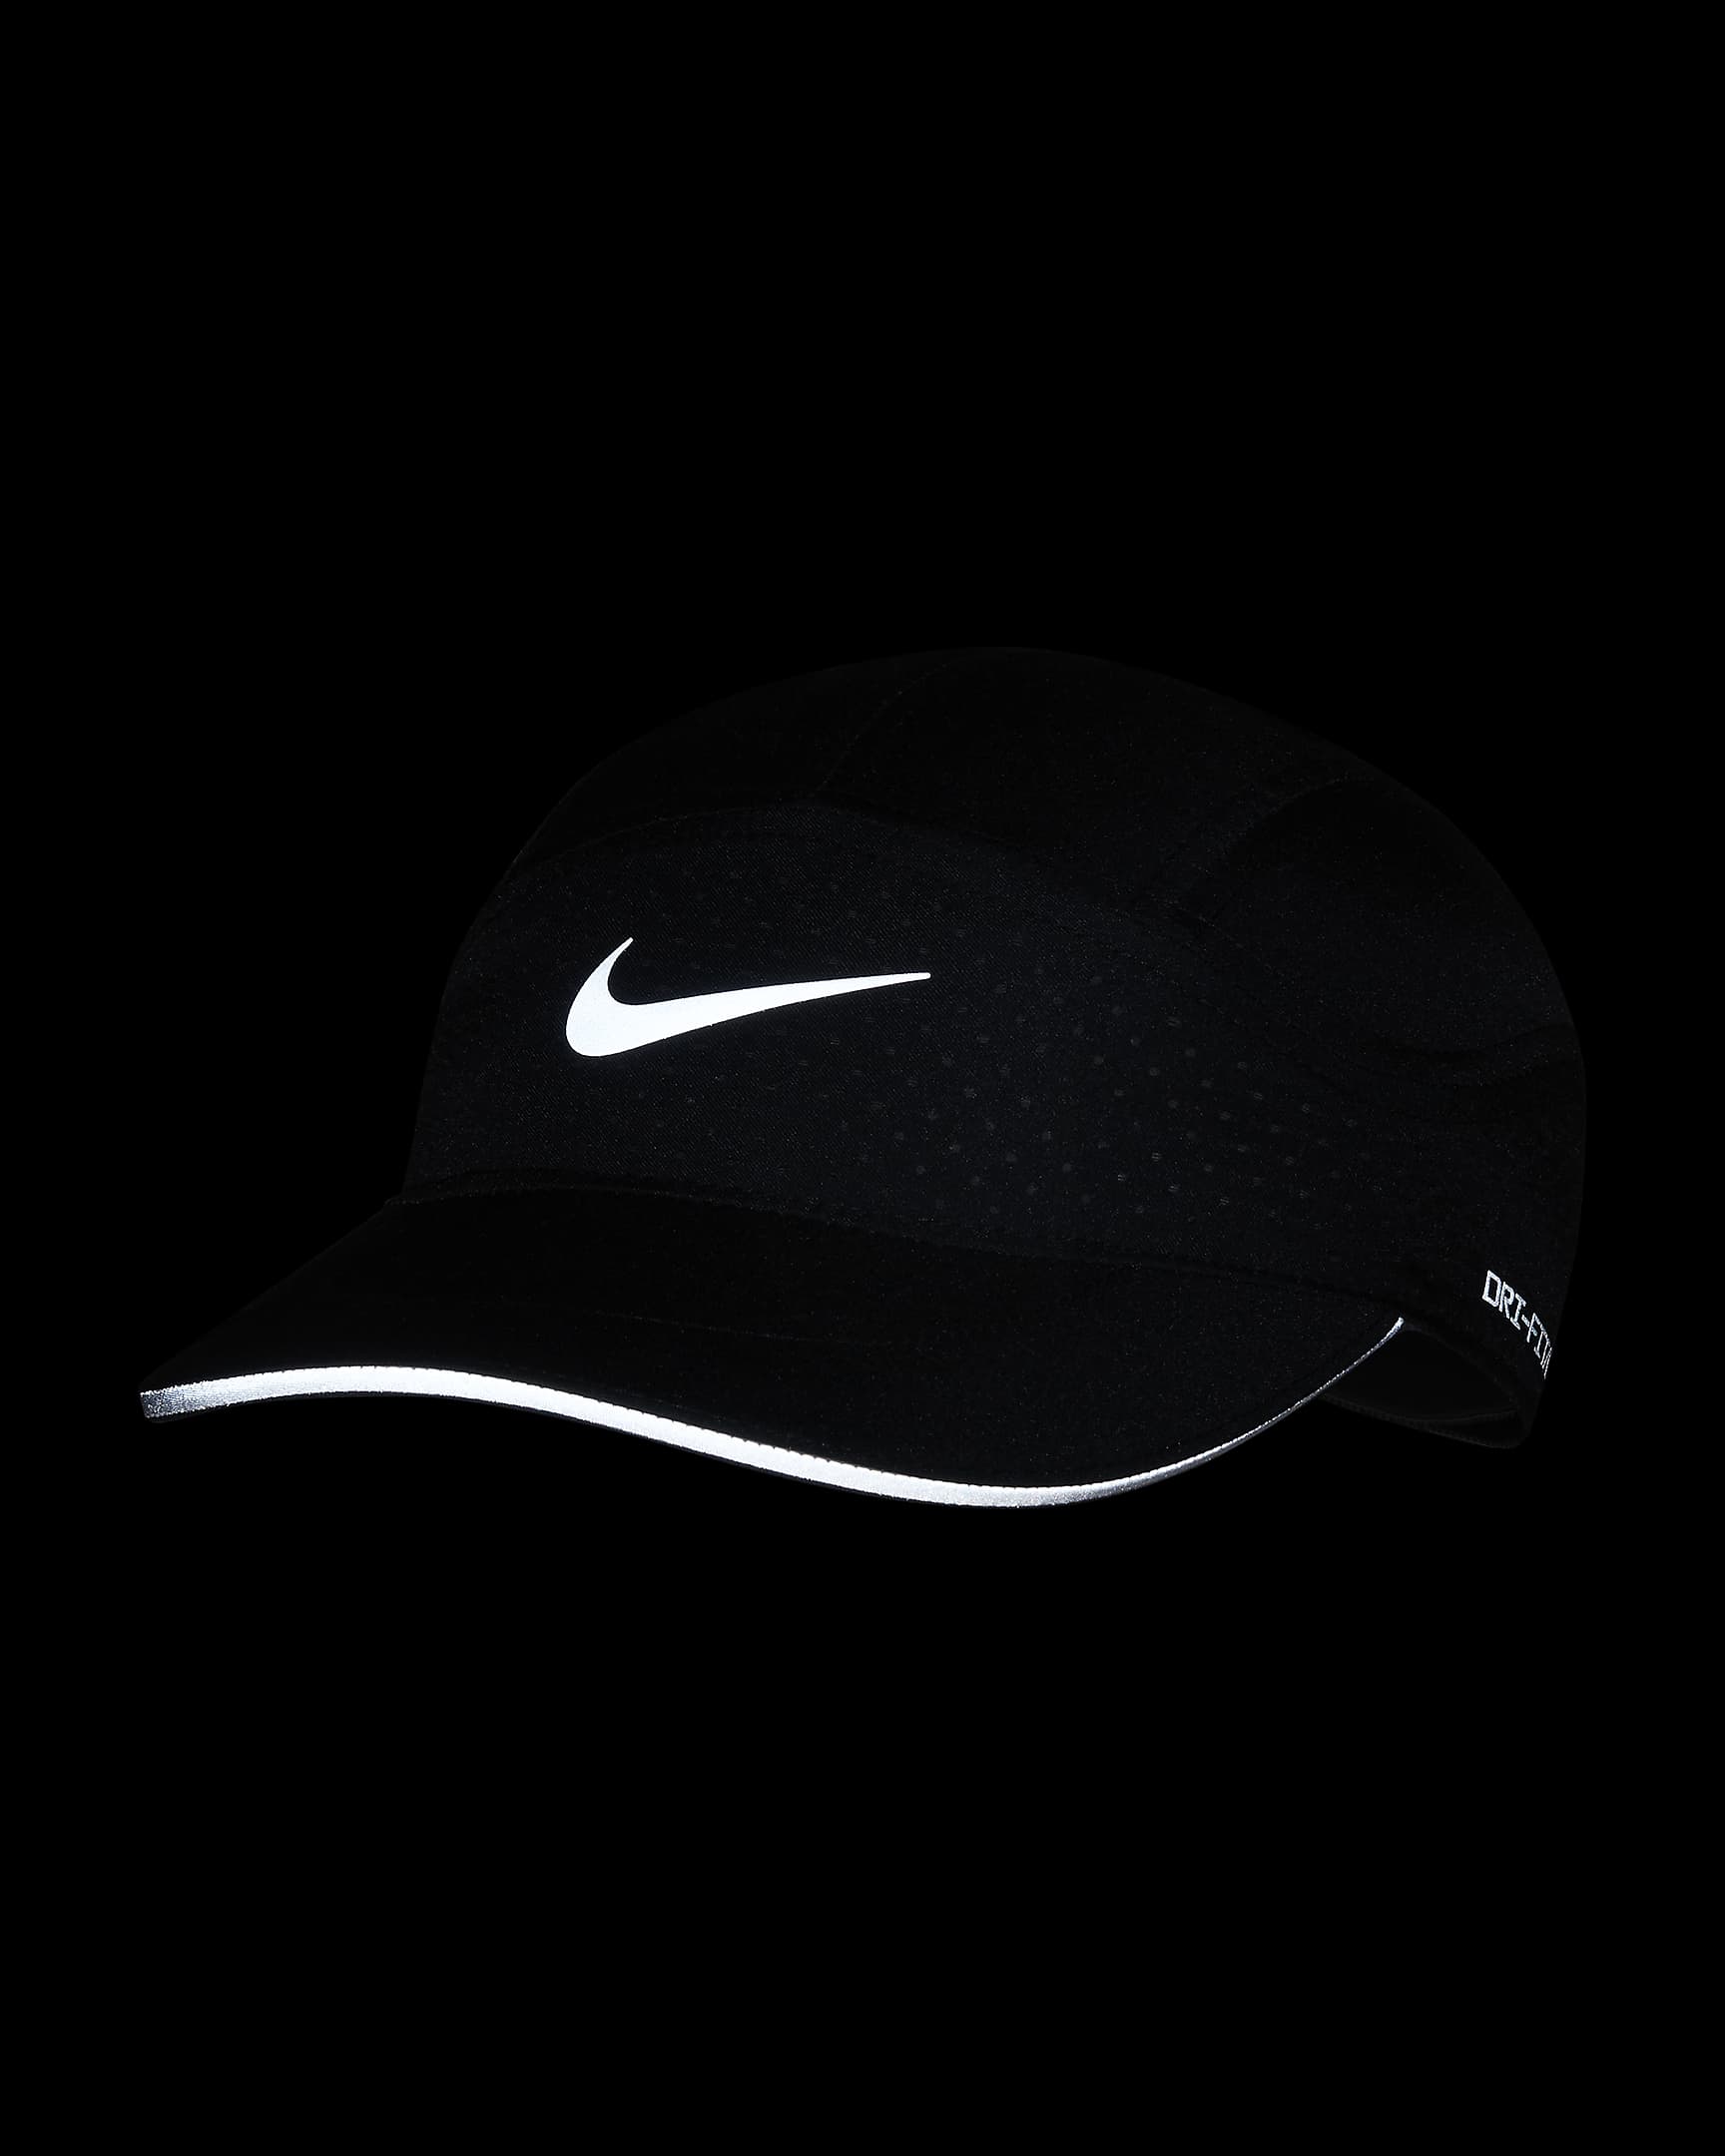 Nike Dri-FIT ADV Fly Unstructured Reflective Design Cap. Nike NZ